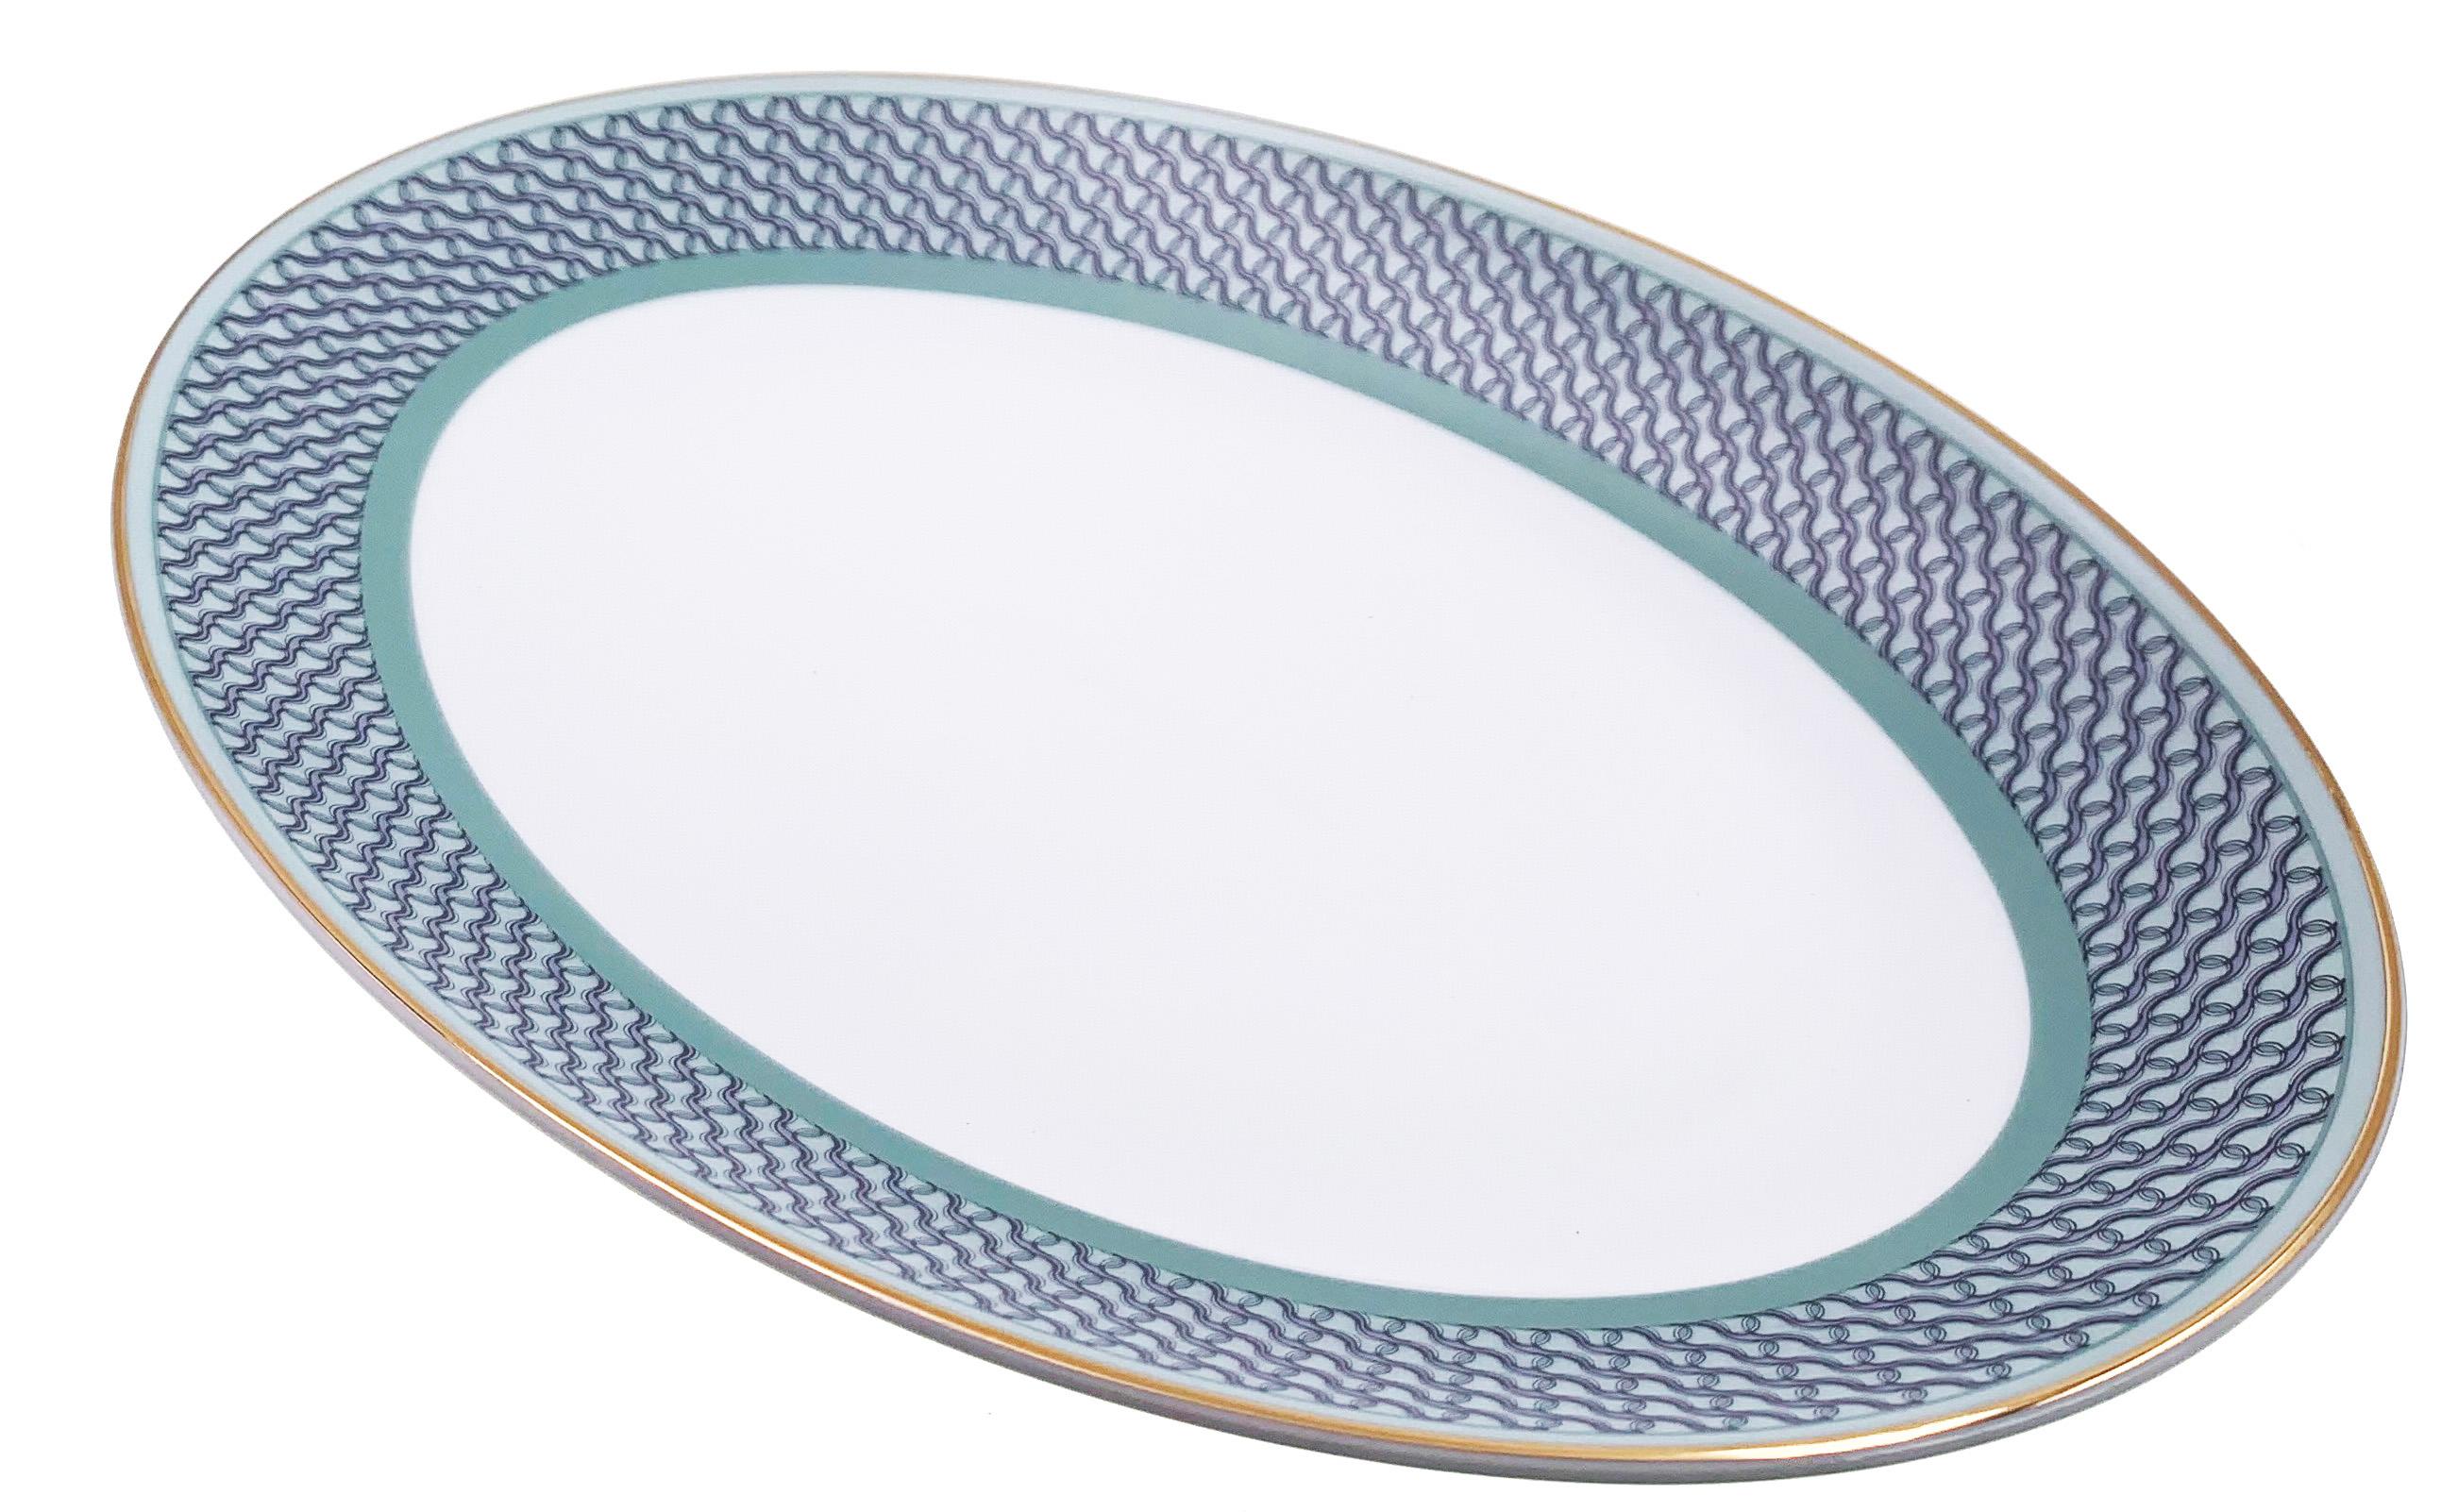 Description: Medium oval serving plate
Color: Sage green
Size: 31 x 22 x 4H cm
Material: Porcelain and gold
Collection: Midcentury Rhythm

Larger quantities available upon request, with 8 weeks production time.